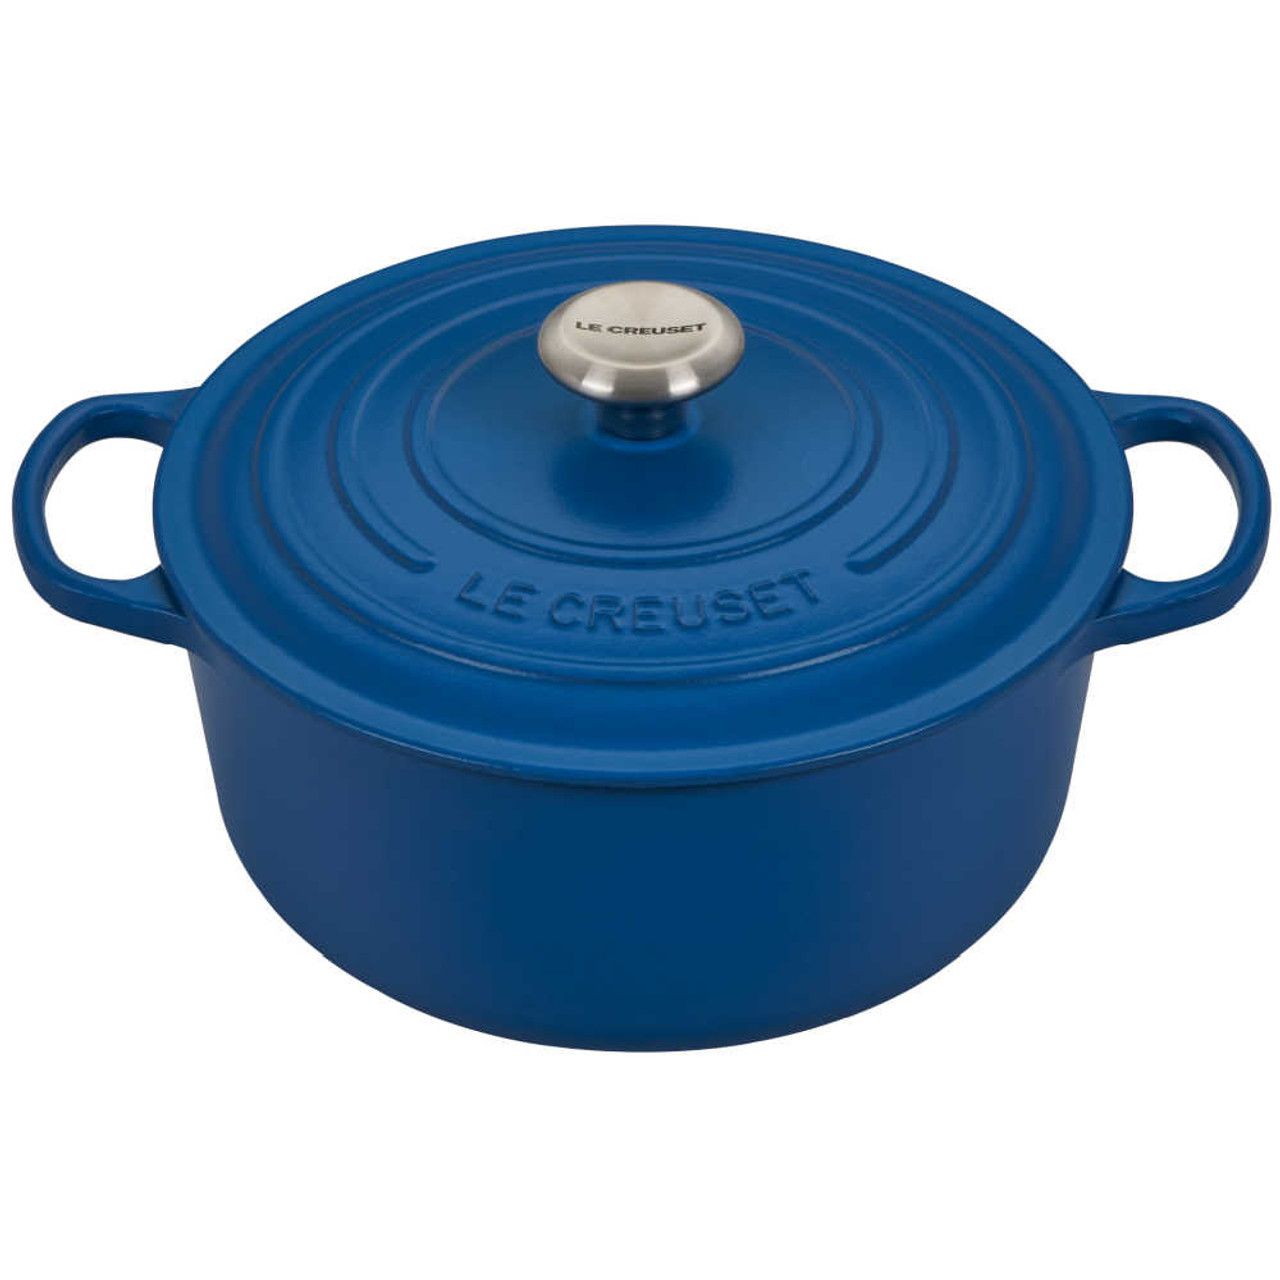 https://cdn11.bigcommerce.com/s-hccytny0od/images/stencil/1280x1280/products/3389/17604/Le_Creuset_Round_Dutch_Oven_Marseille__05771.1639879750.jpg?c=2?imbypass=on